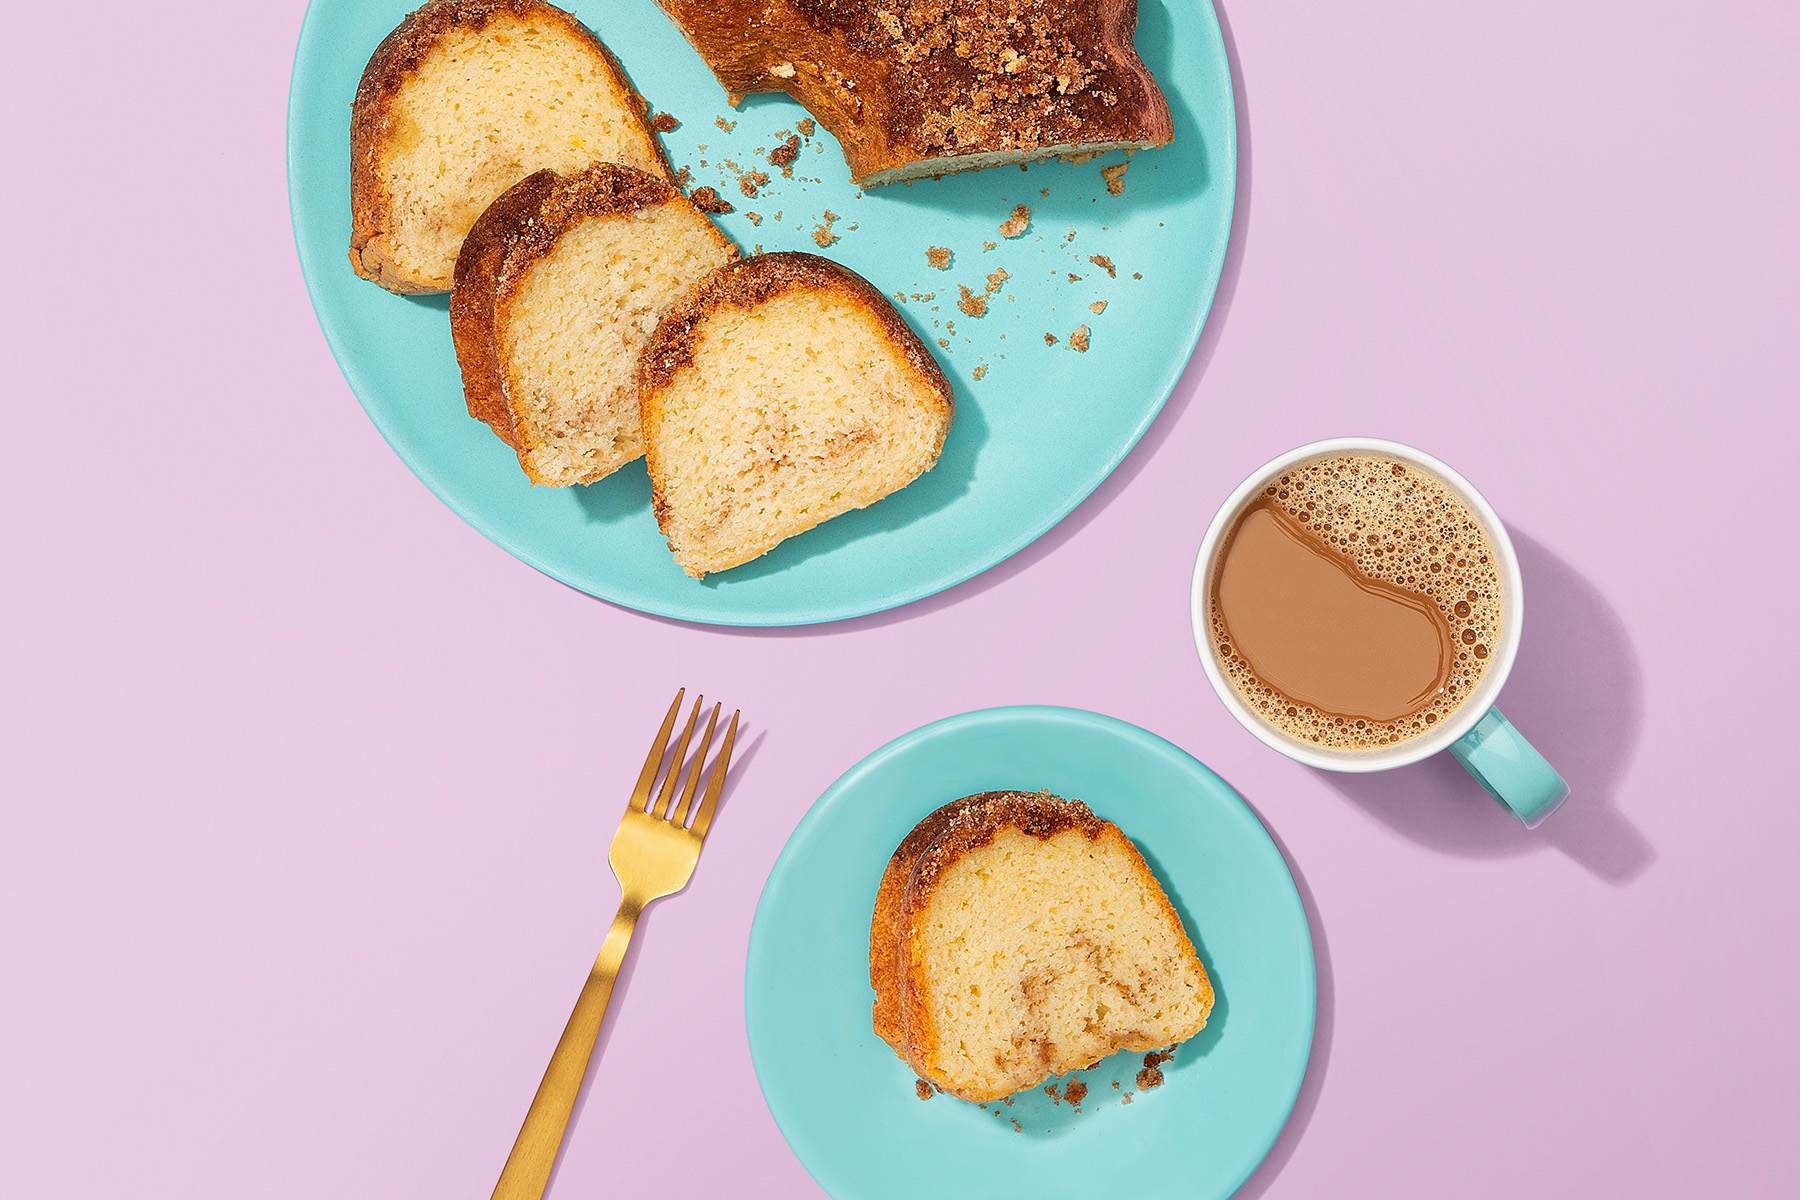 slices of coffee cake with a mug of coffee on the side